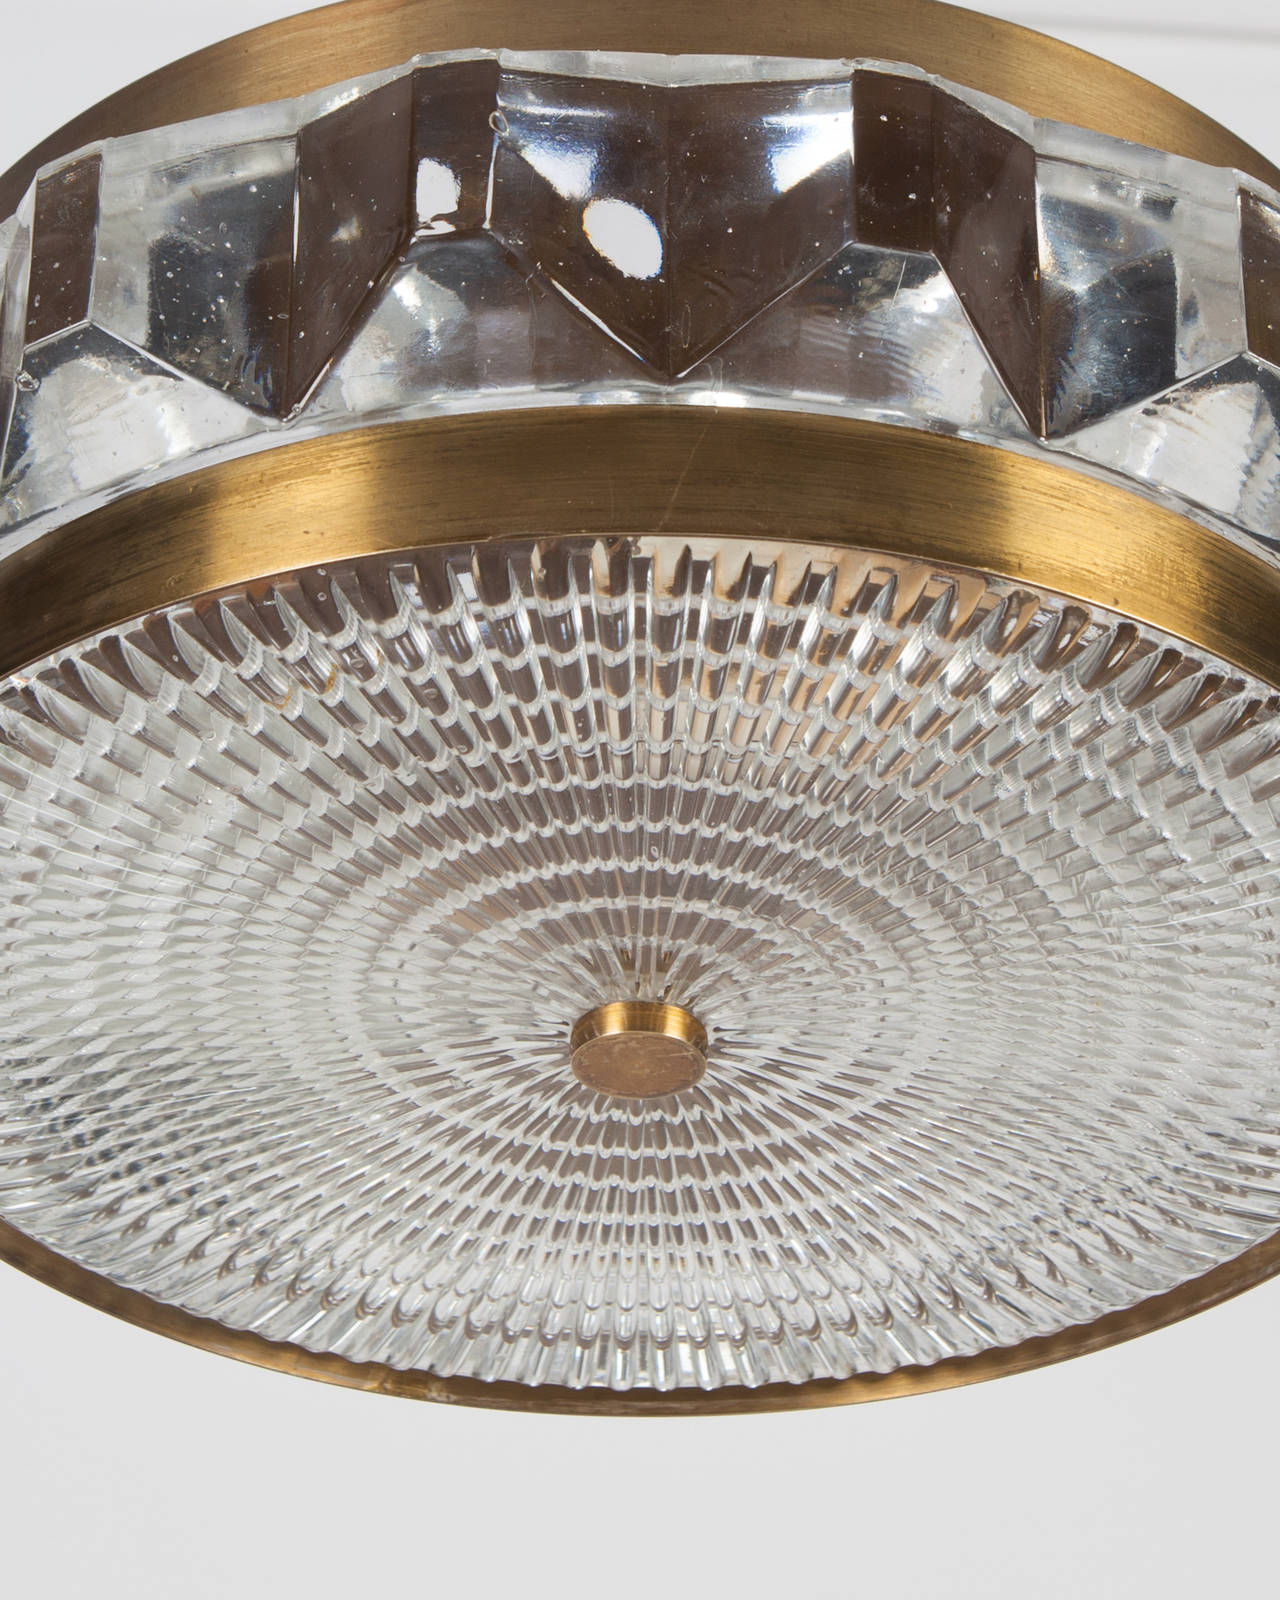 AHL3922

Circa 1960
A cut glass pendant in its original aged brass finish. Attributed to the Swedish glassmaker Orrefors. Due to the antique nature of this fixture, there may be some nicks or imperfections in the glass as well as variations from